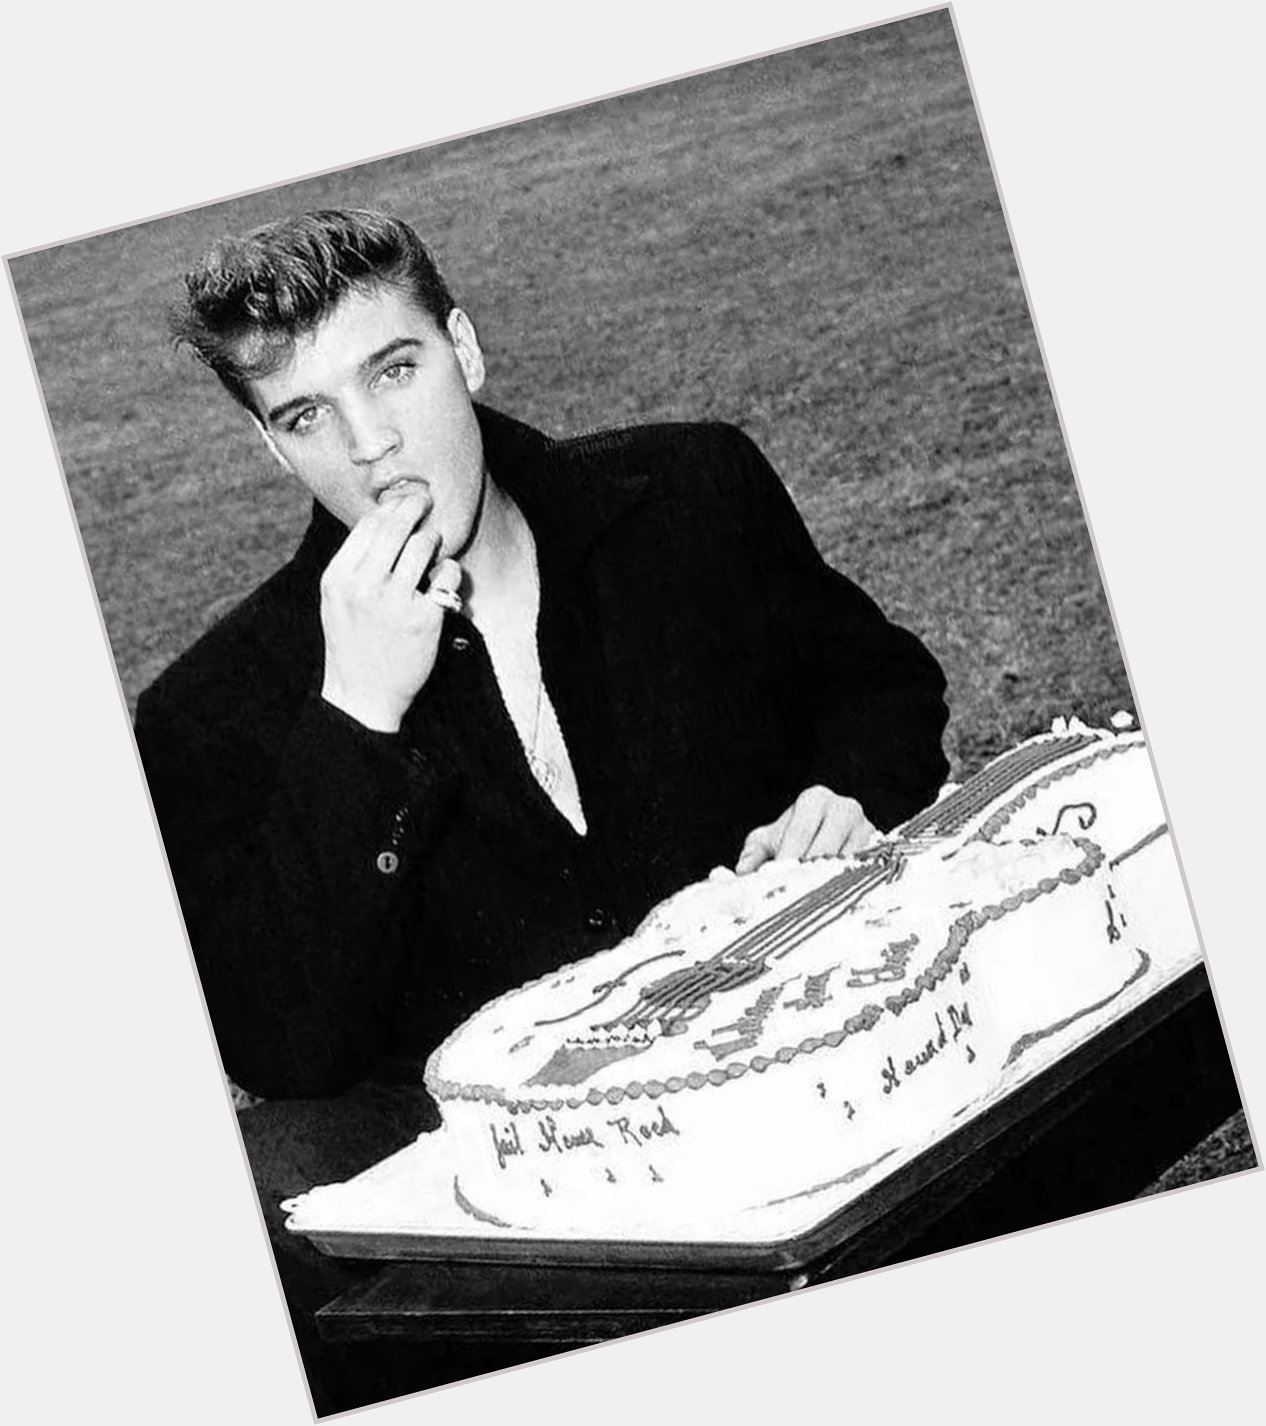 Elvis Presley was born in Tupelo, Mississippi, on this day in 1935. Happy birthday to The King. 